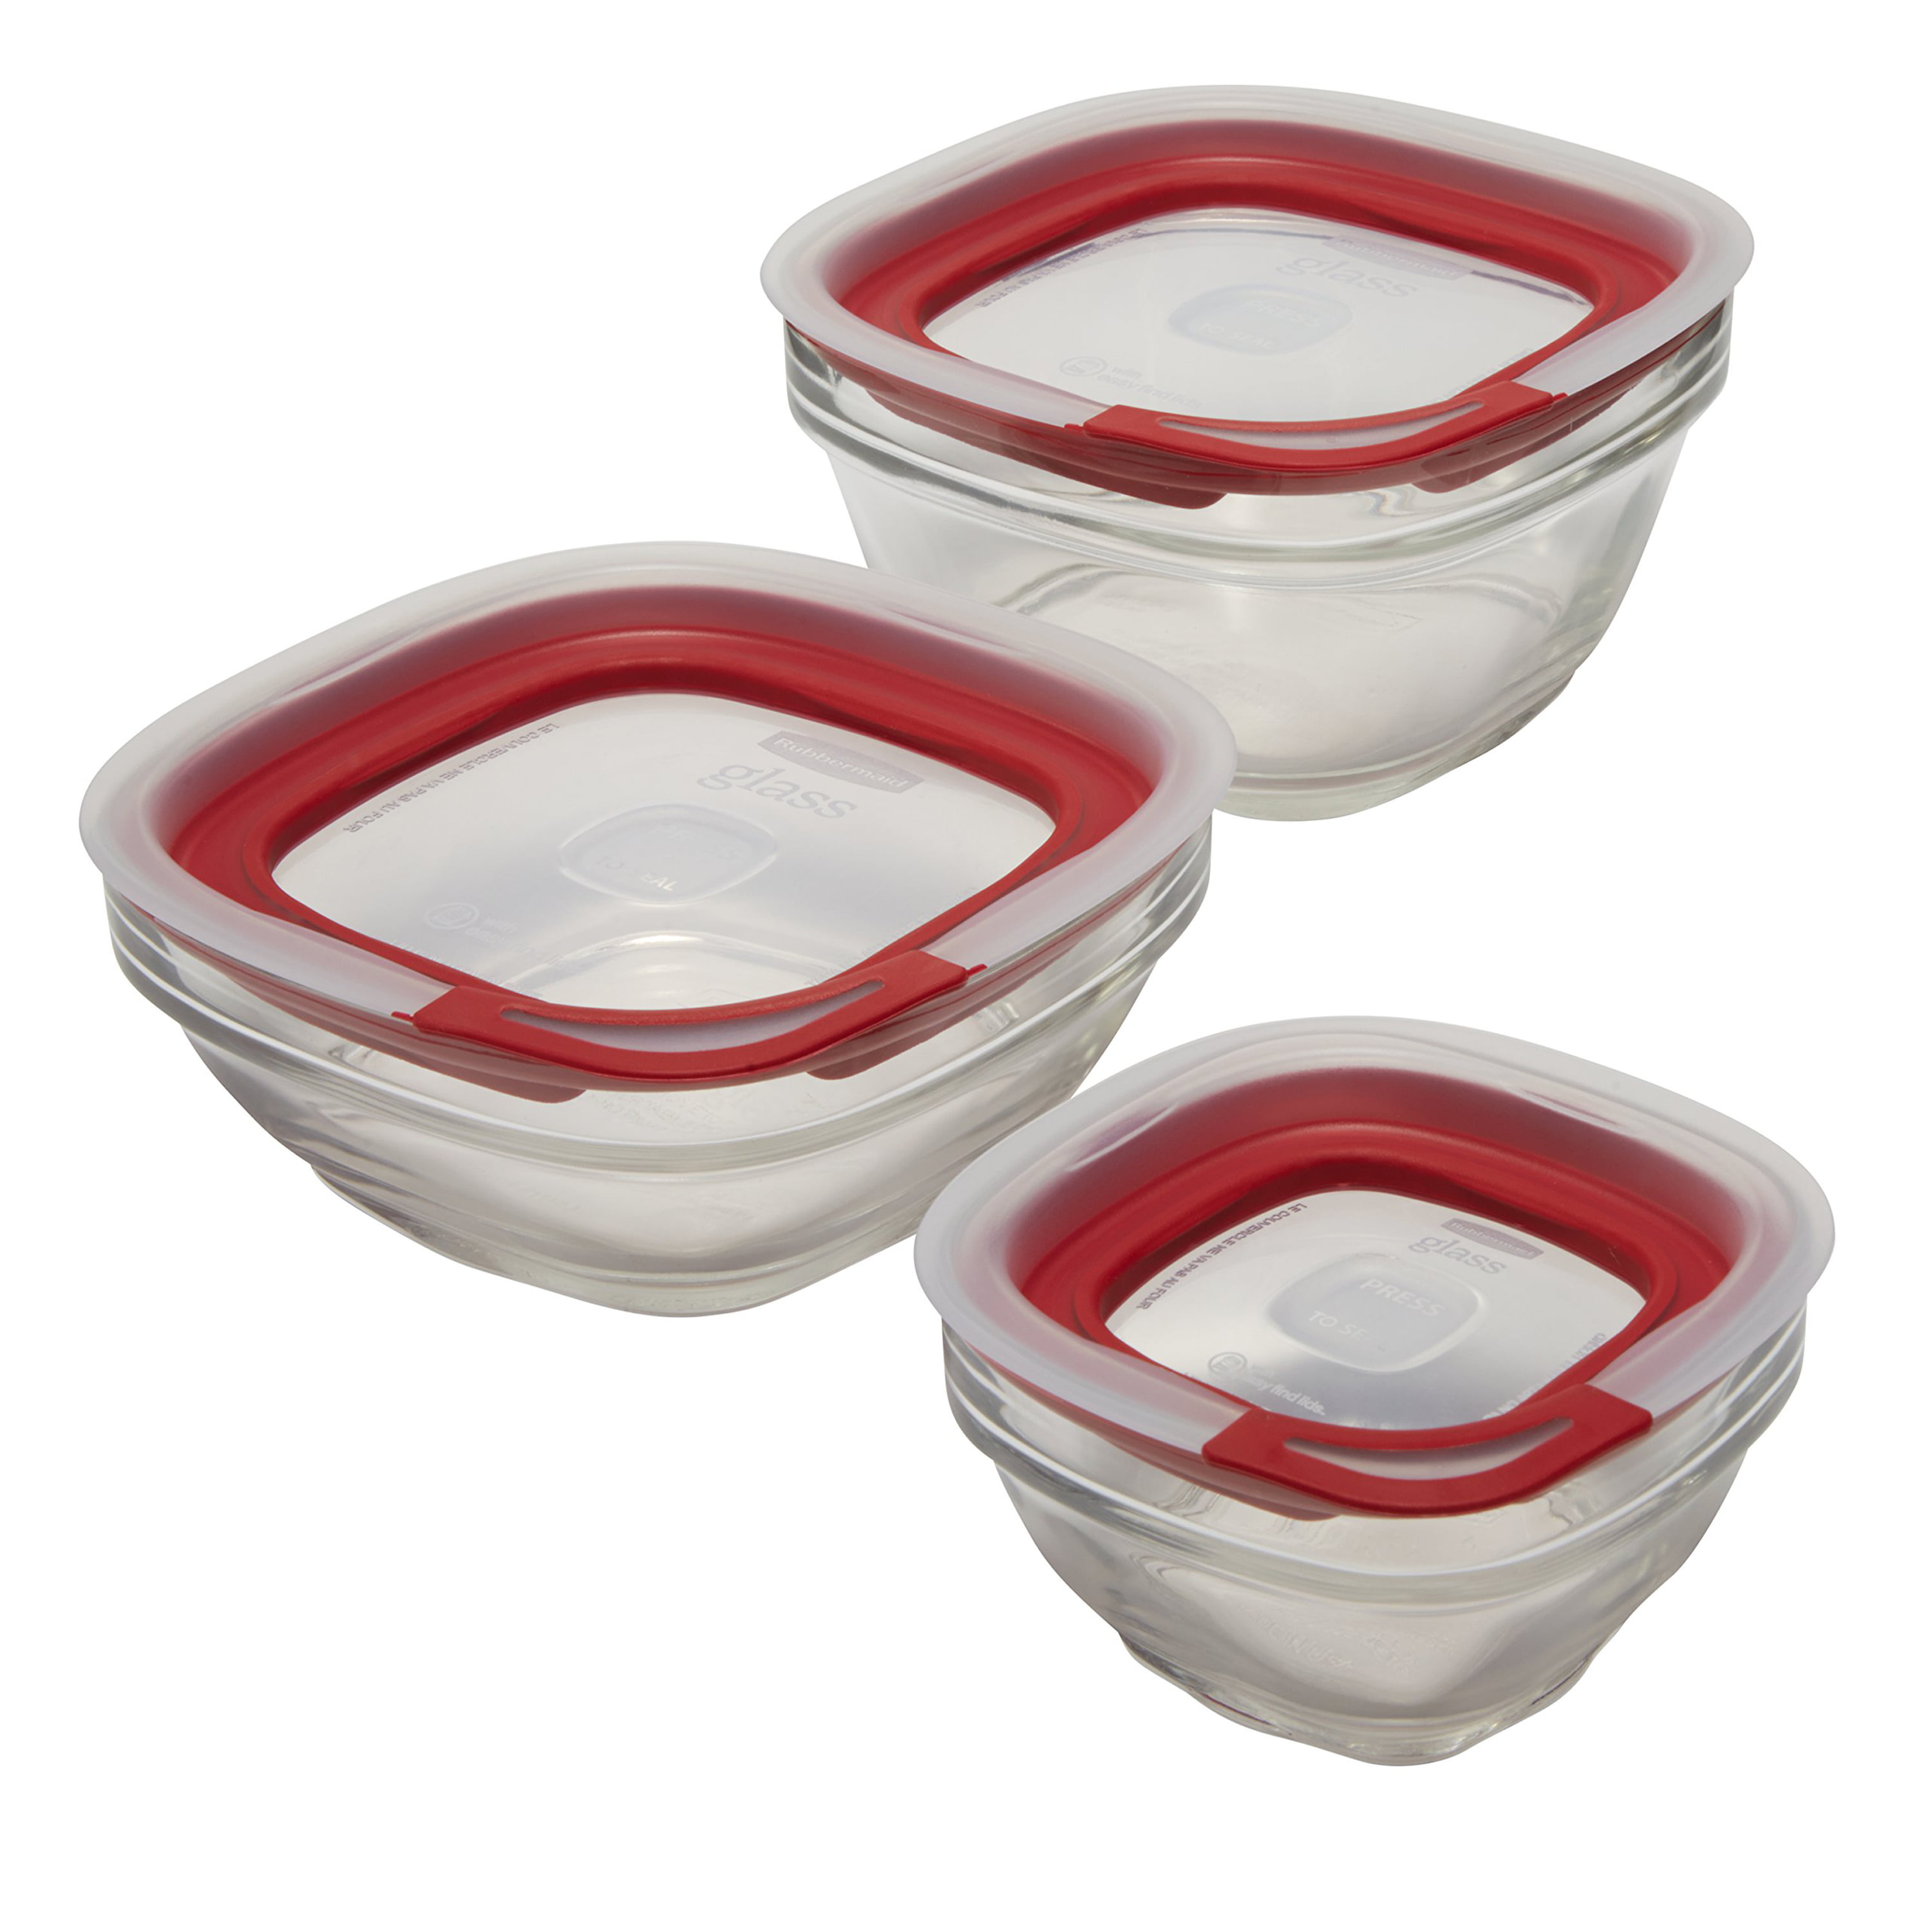 Rubbermaid Glass Easy Find Lids 1.5 Cup Rubbermaid(71691437314): customers  reviews @